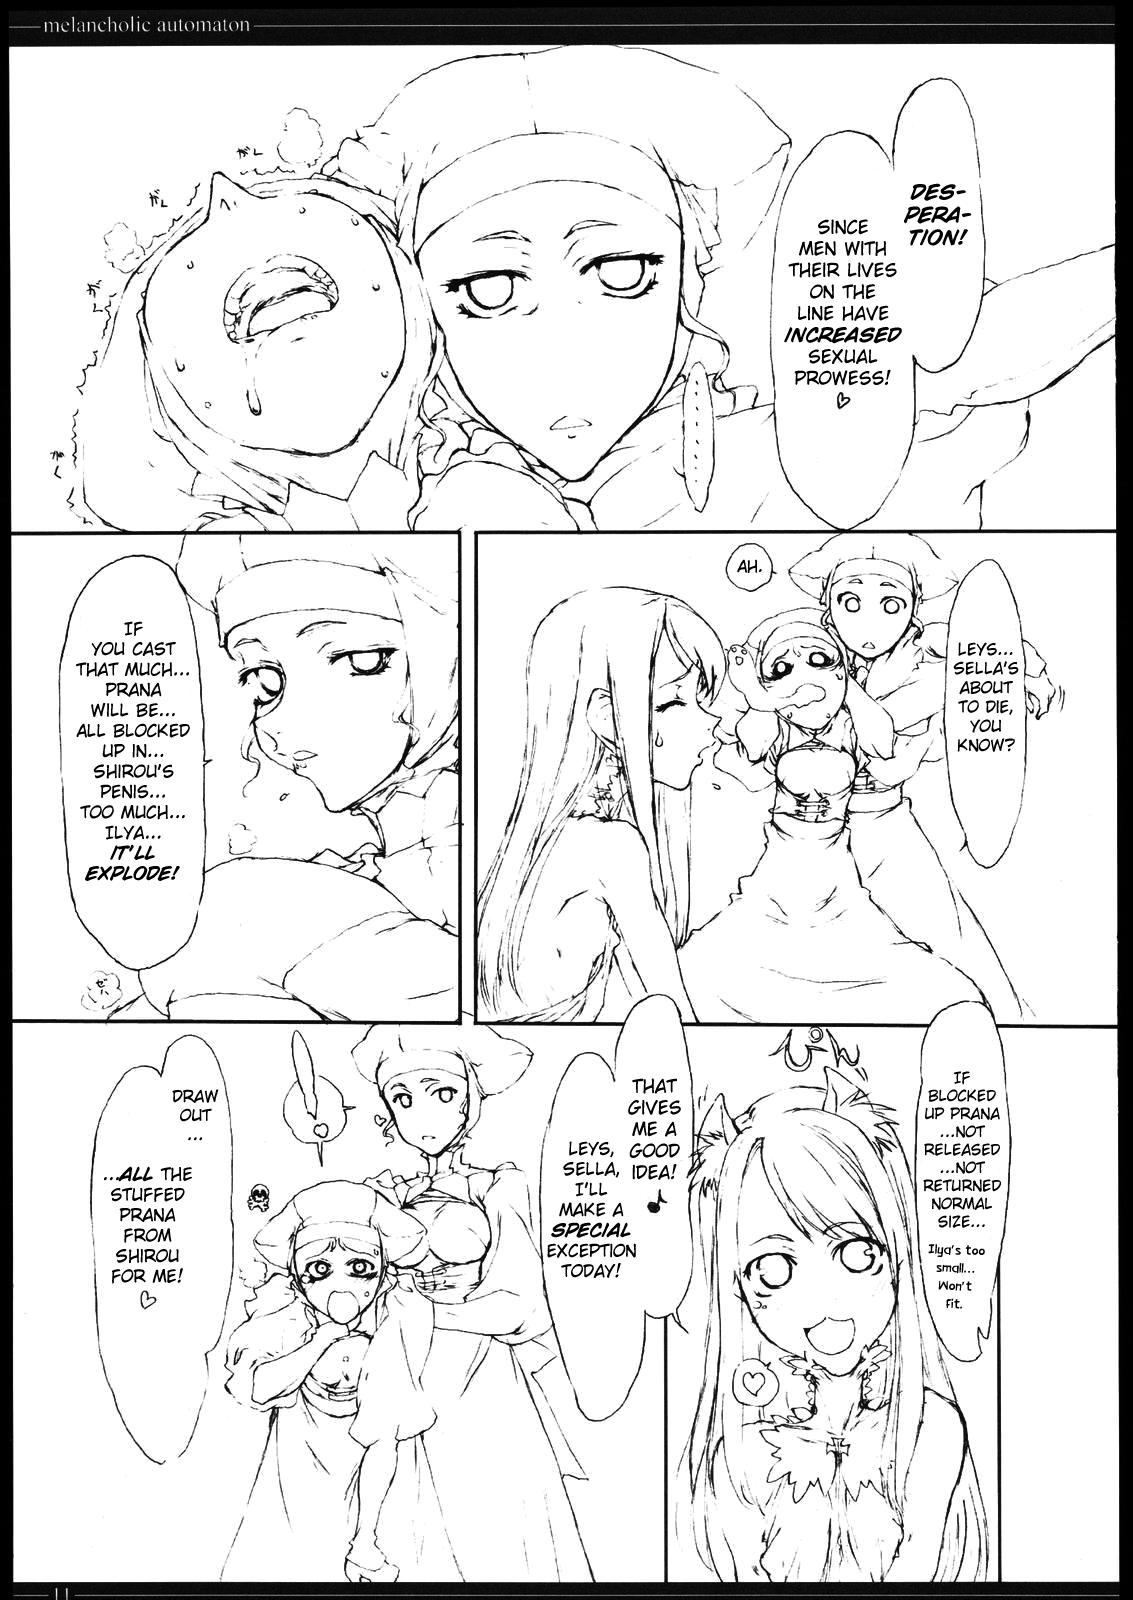 Super Melancholic Automaton - One day at the castle of Einzbern - Fate stay night Amigo - Page 10